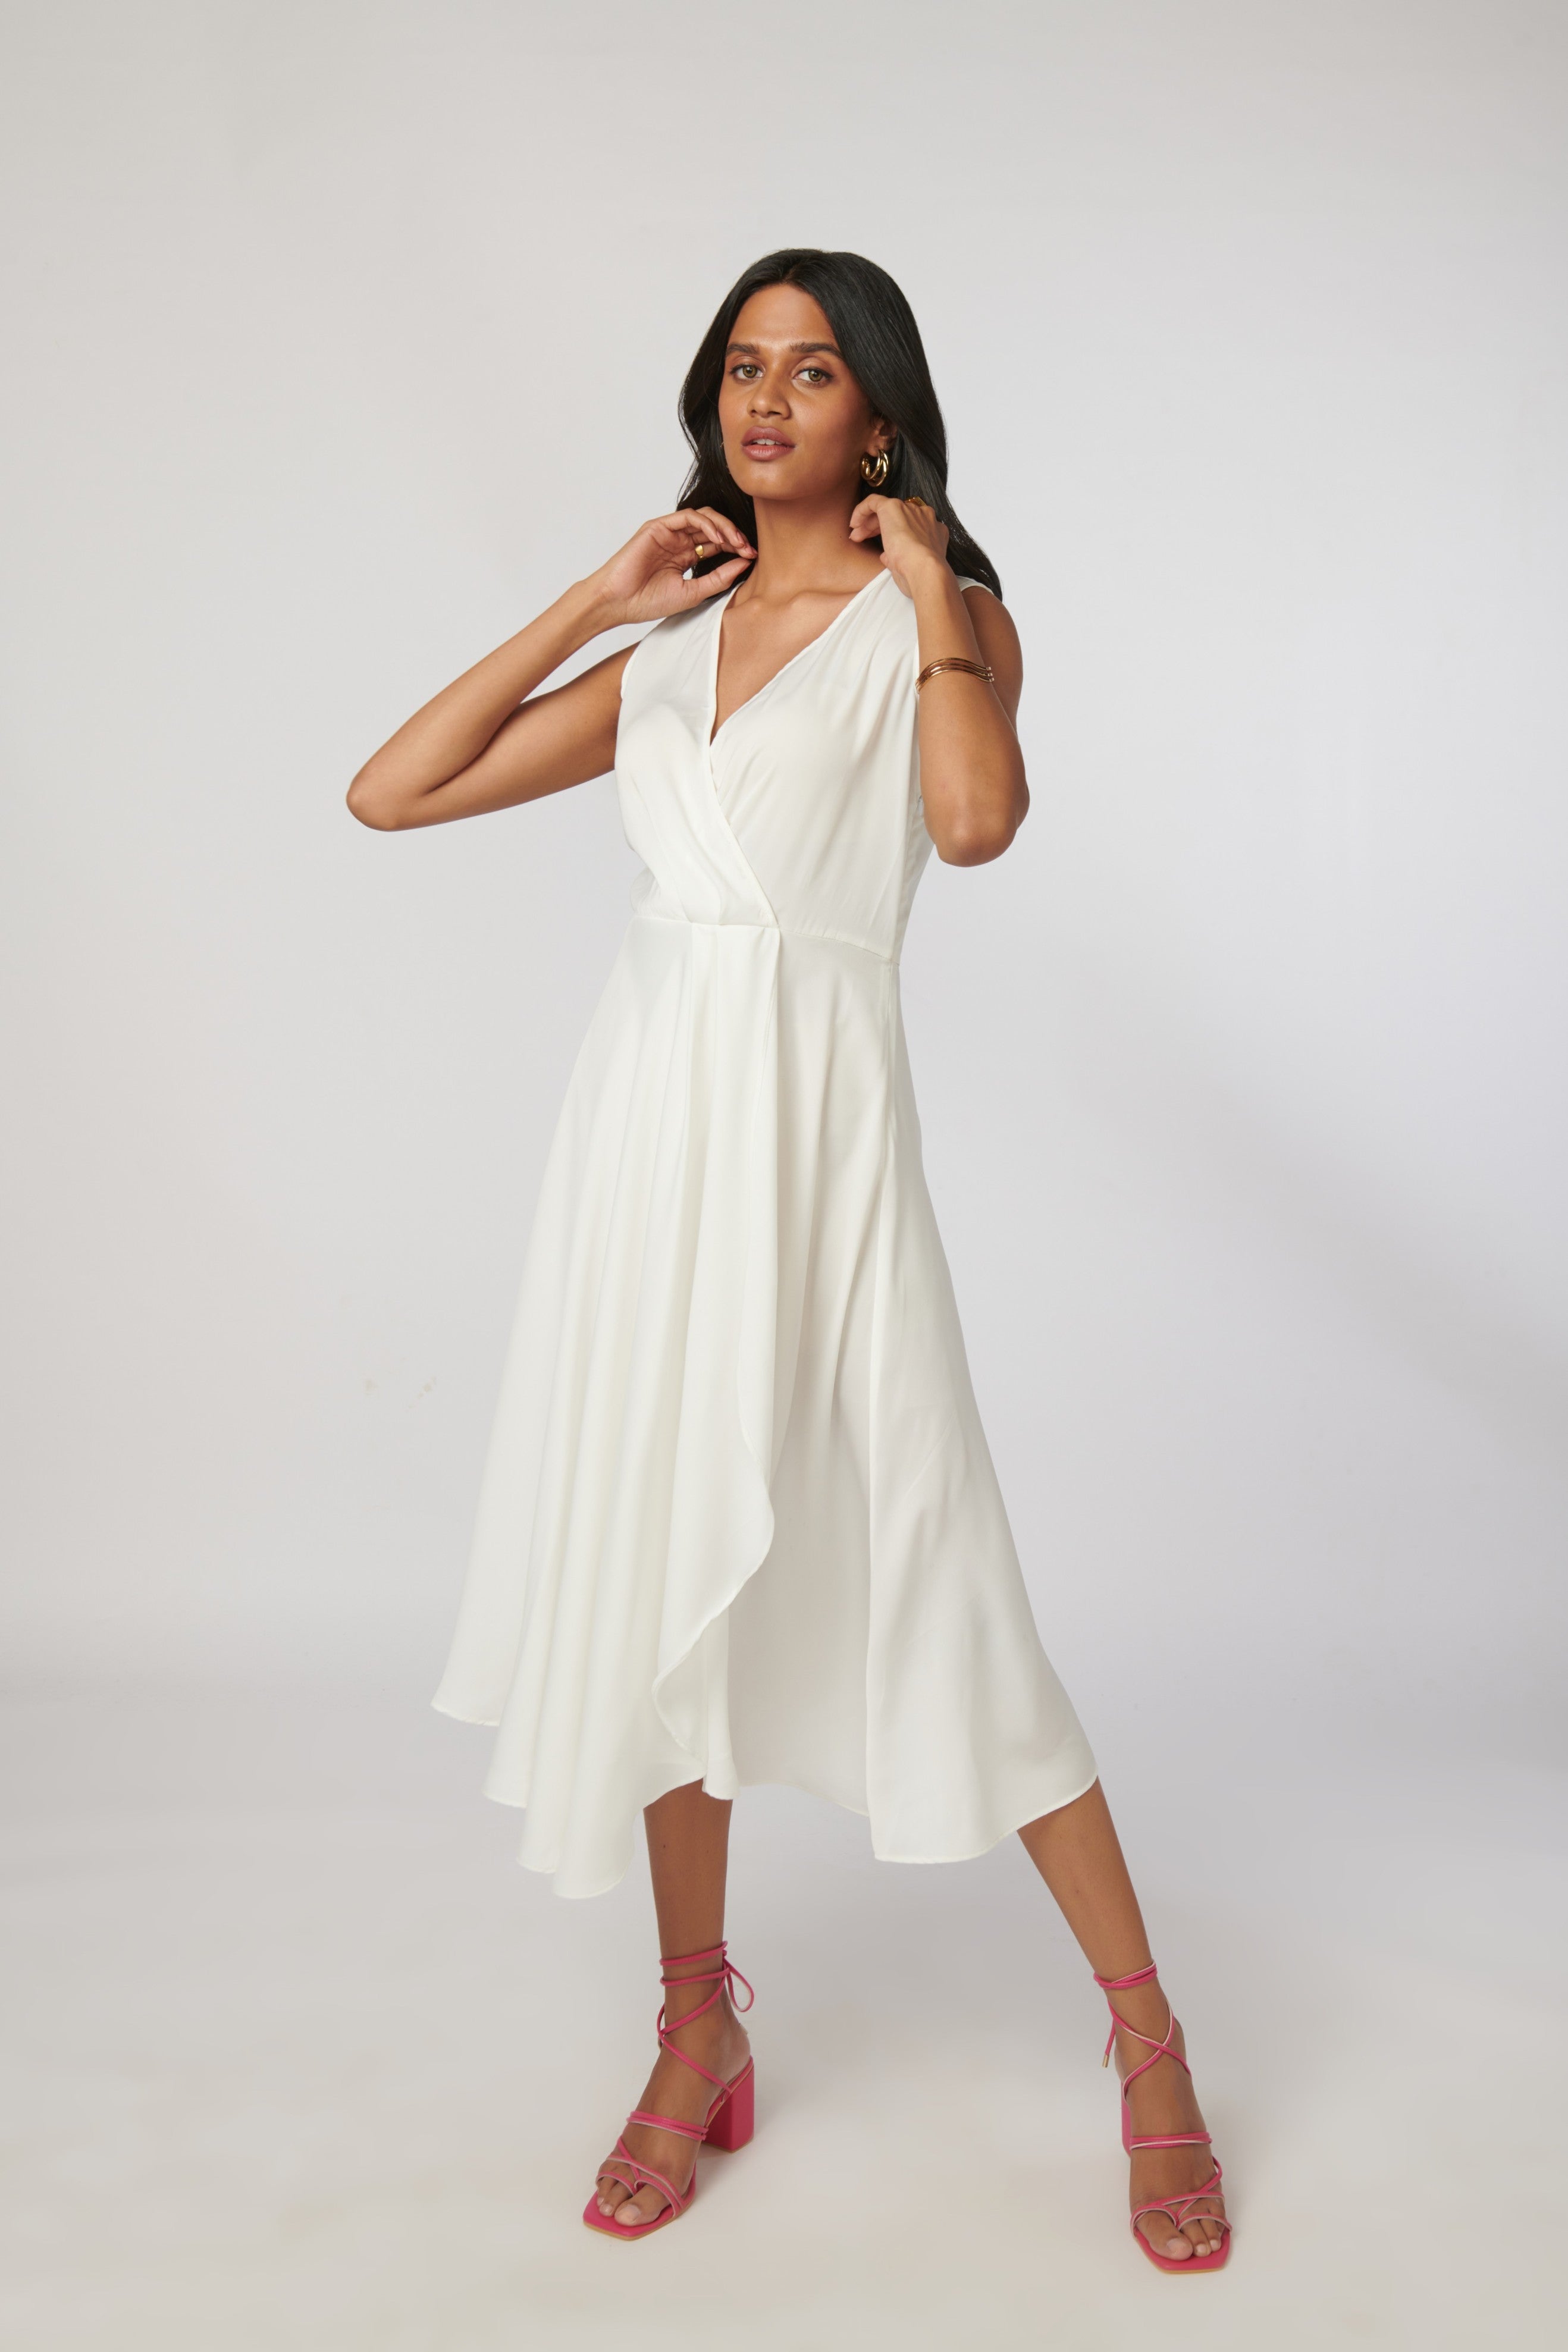 Stephane Mini Dress - Corset Scoop Neck Fit and Flare Dress in Ivory |  Showpo USA